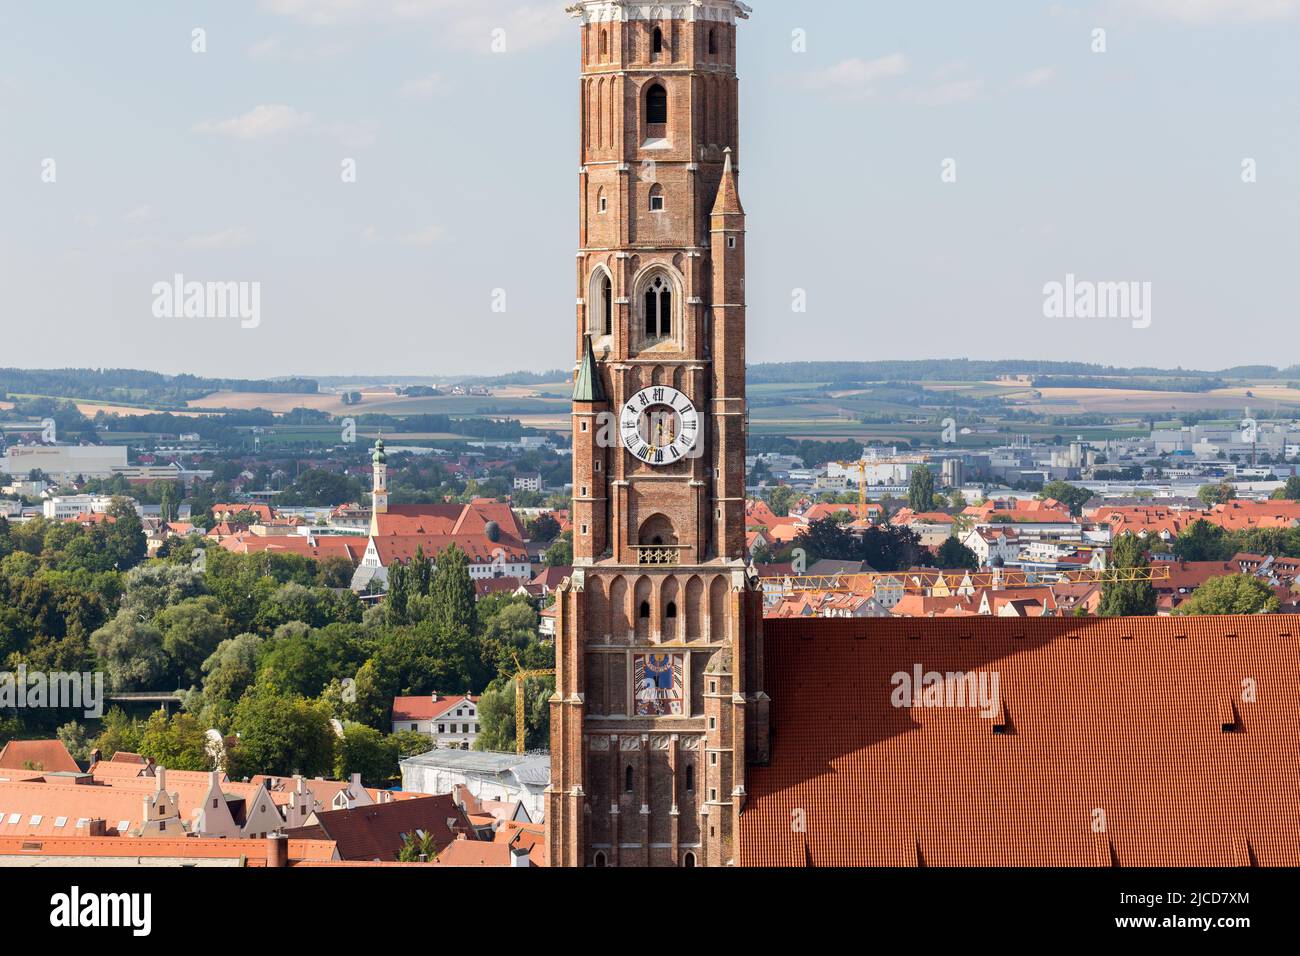 Landshut, Germany - Aug 14, 2021: Close up view of the steeple of basilica St. Martin. The tallest brick tower of a church in the world. Stock Photo